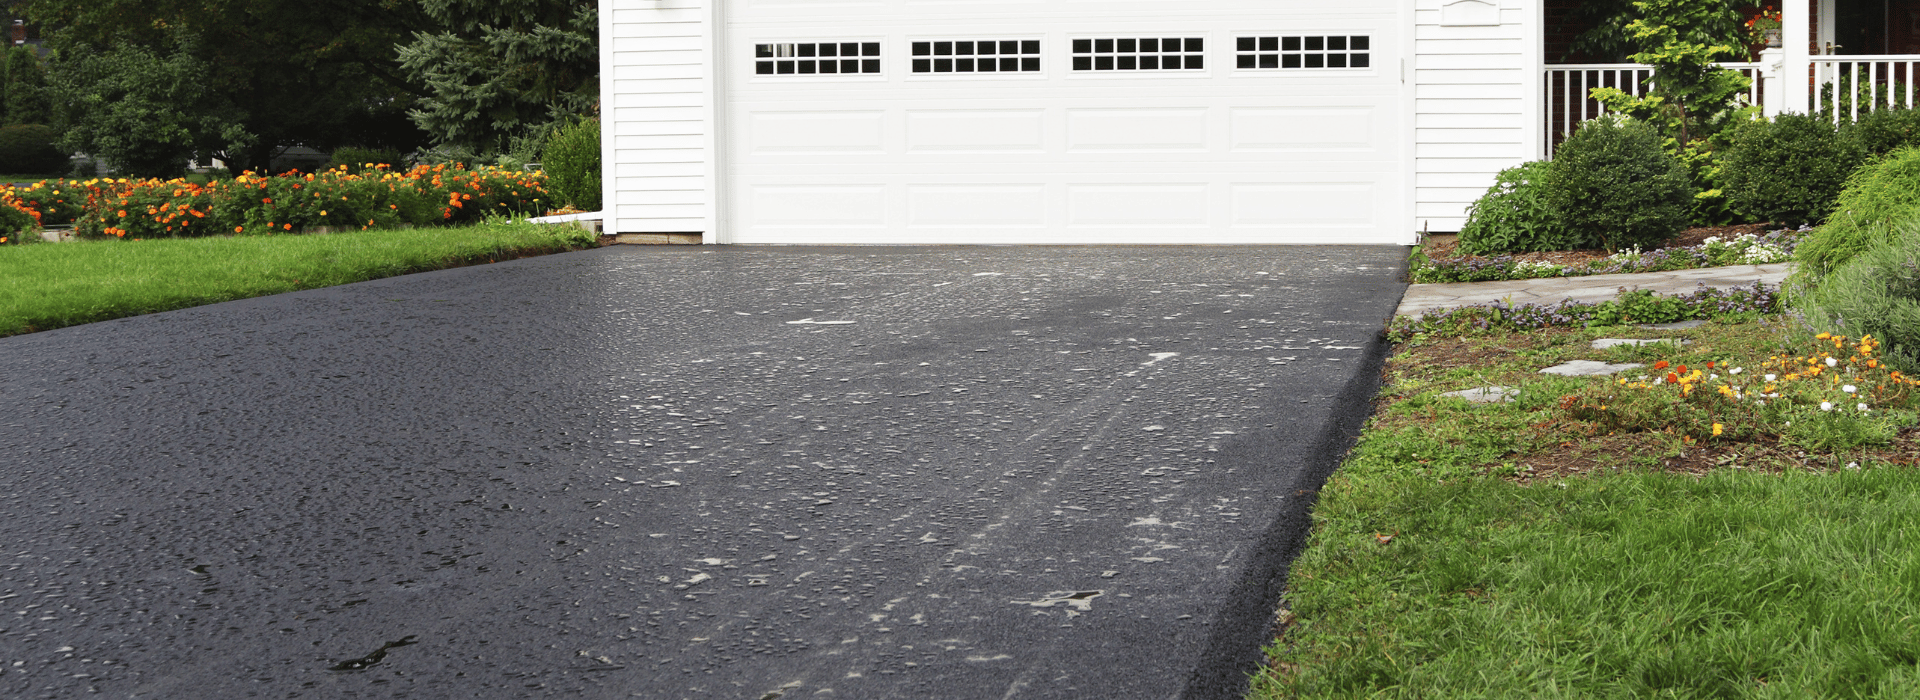 Driveway painted with grey paint